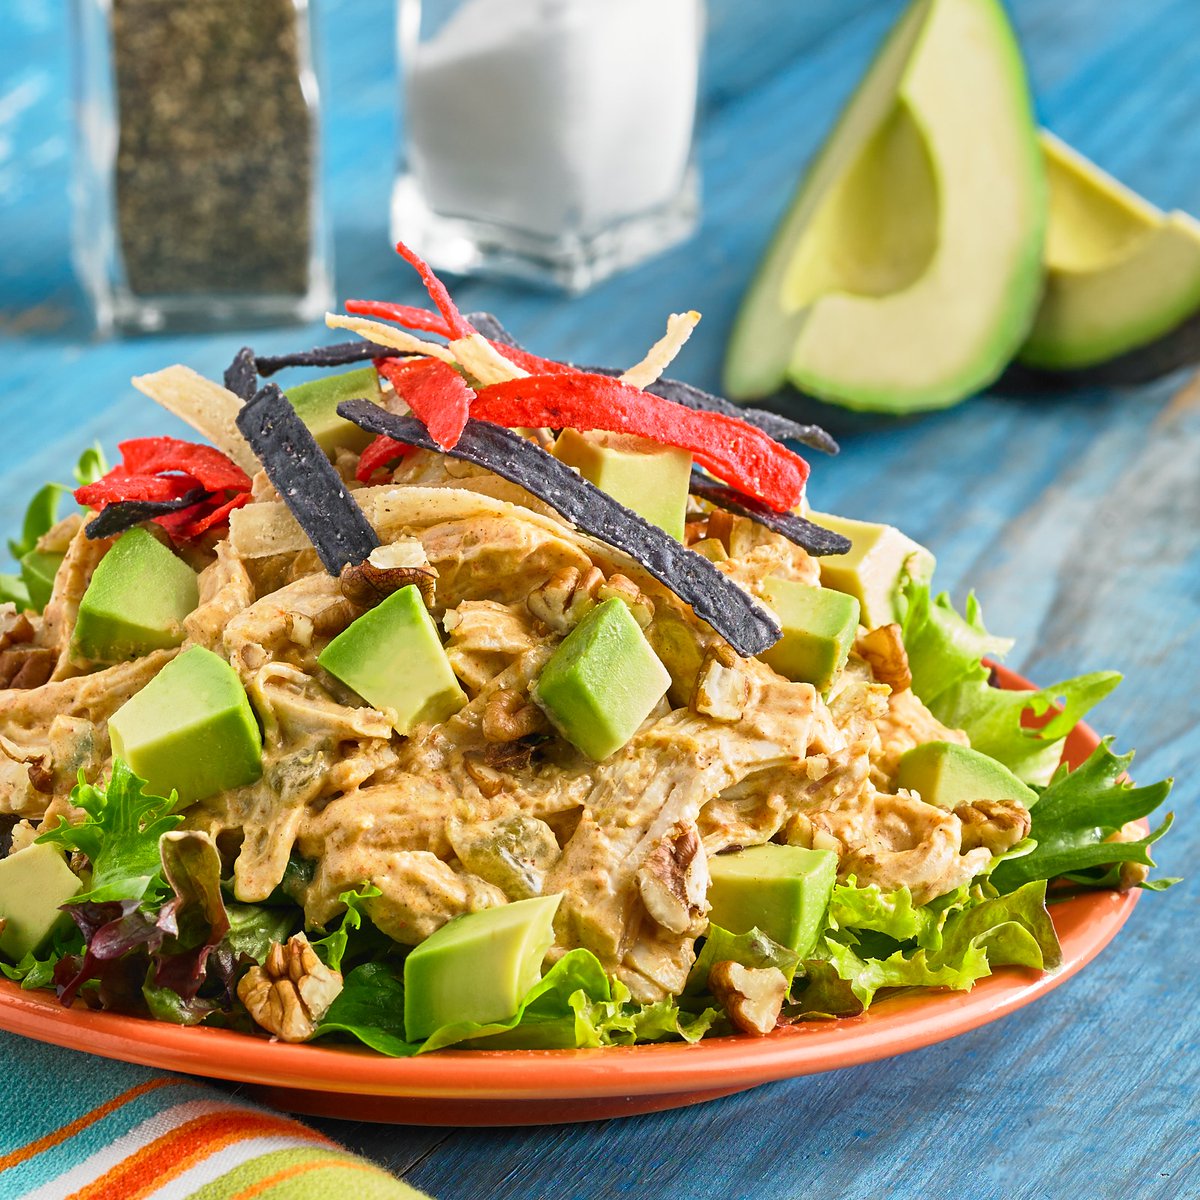 Still riding that Cinco de Mayo high? Keep the fiesta going with this delicious Creamy Fiesta Avocado Chicken Salad! It’s one of our favorite summer salads (and soon to be yours, too 😉). Here's the recipe link 🥑: bit.ly/4b4AHp3 #AlwaysGood